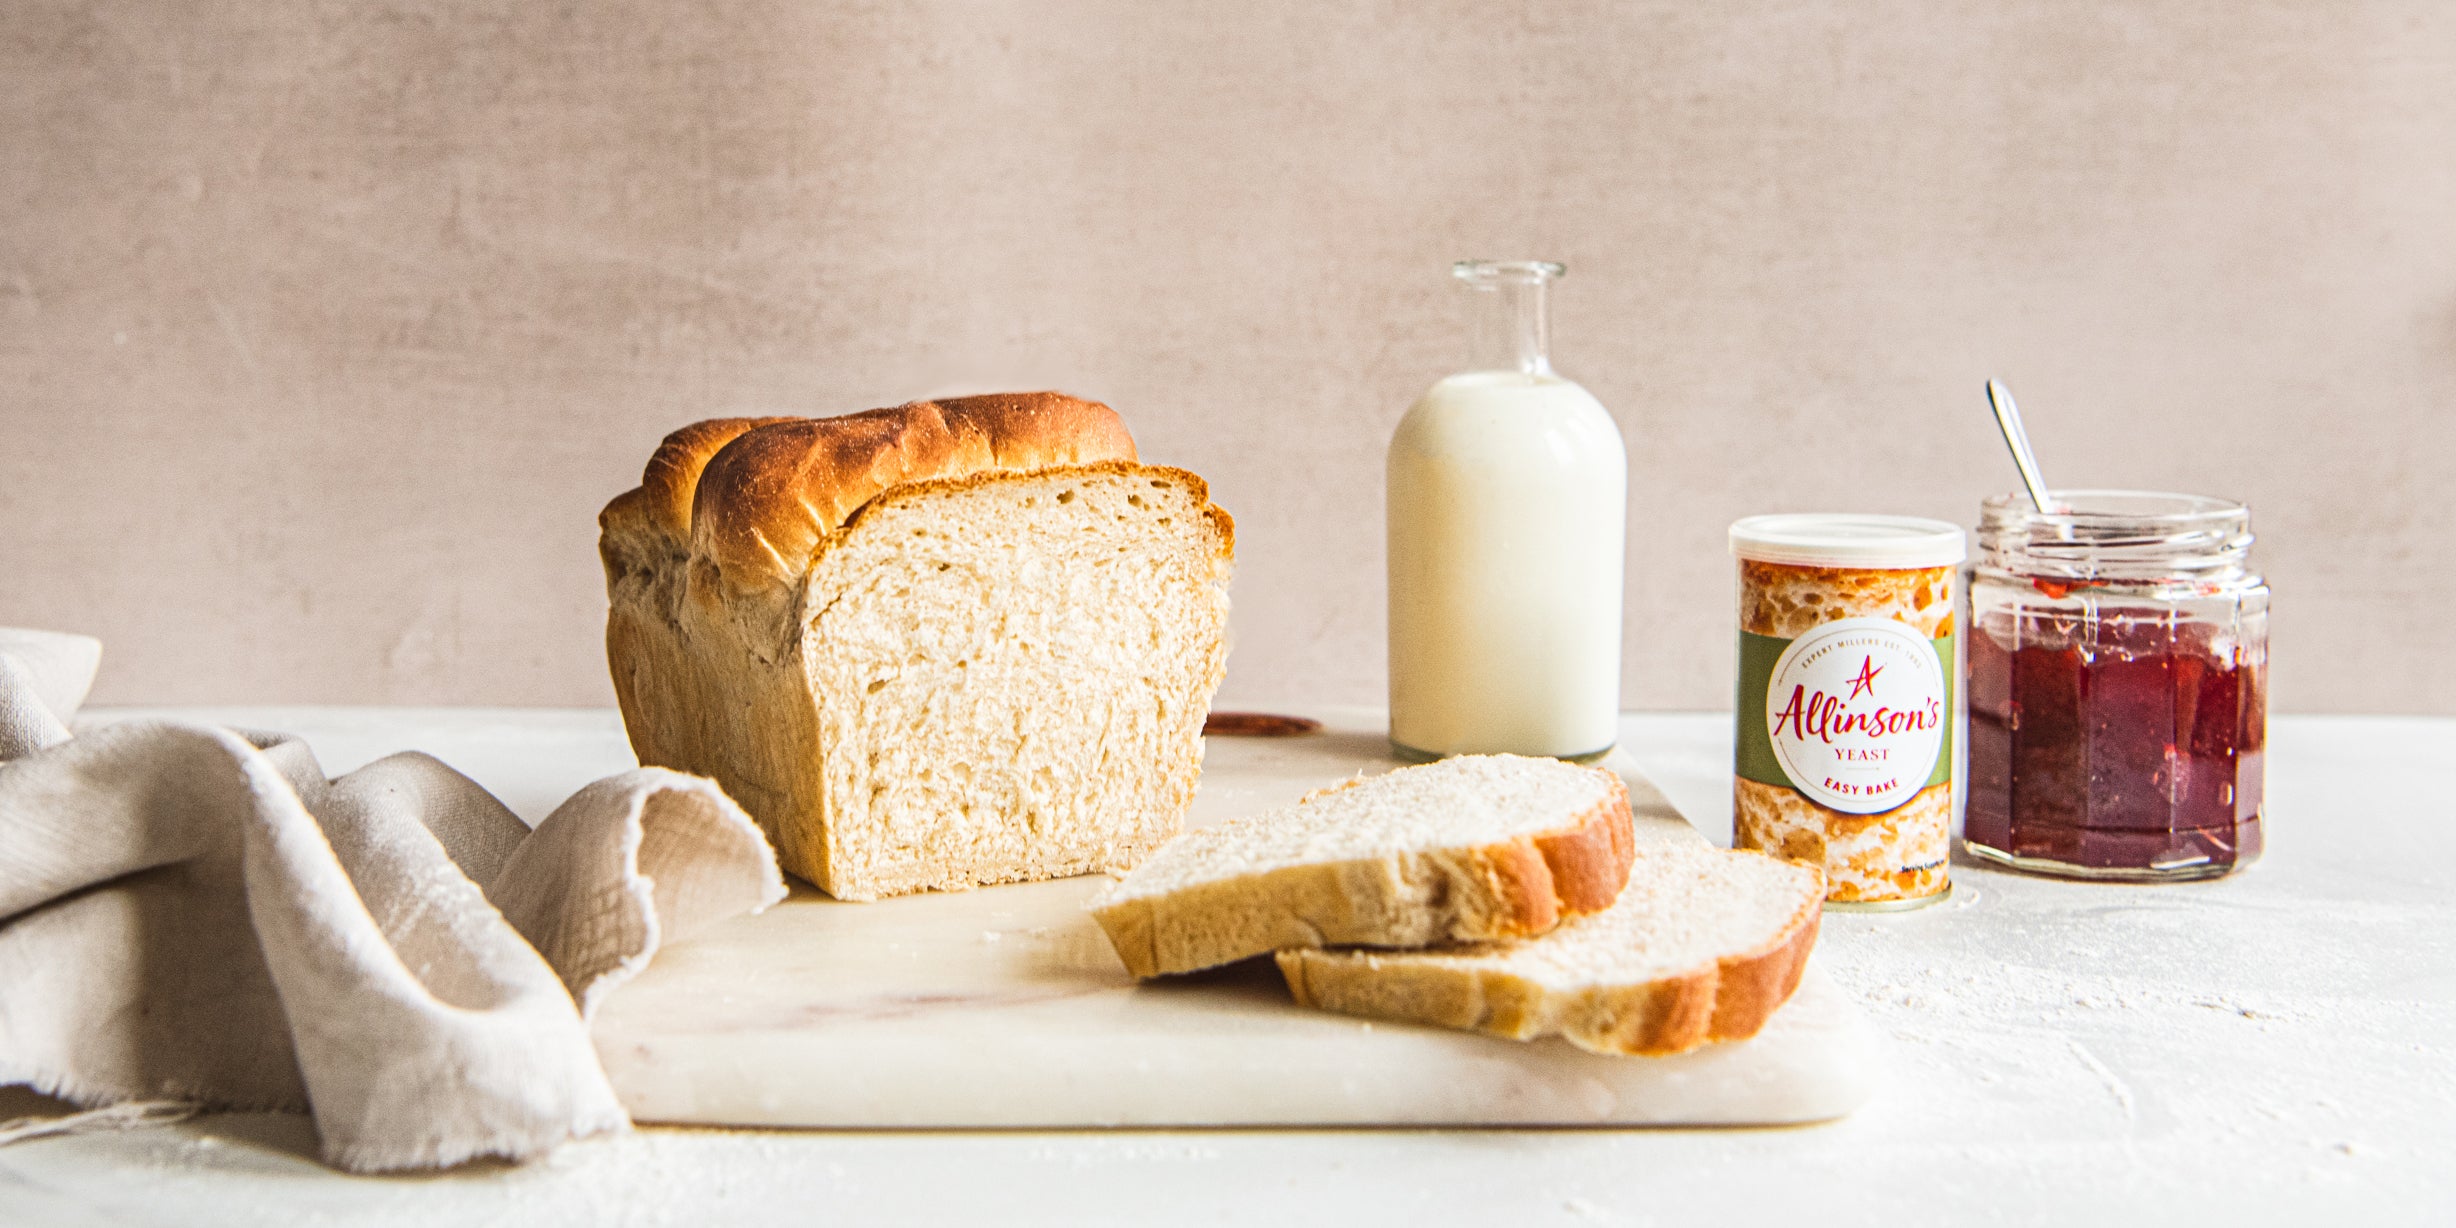 Shokupan Milk Bread sliced on a serving board, next to a glass bottle of milk, and jar of jam and a tin of Allinson's Yeast